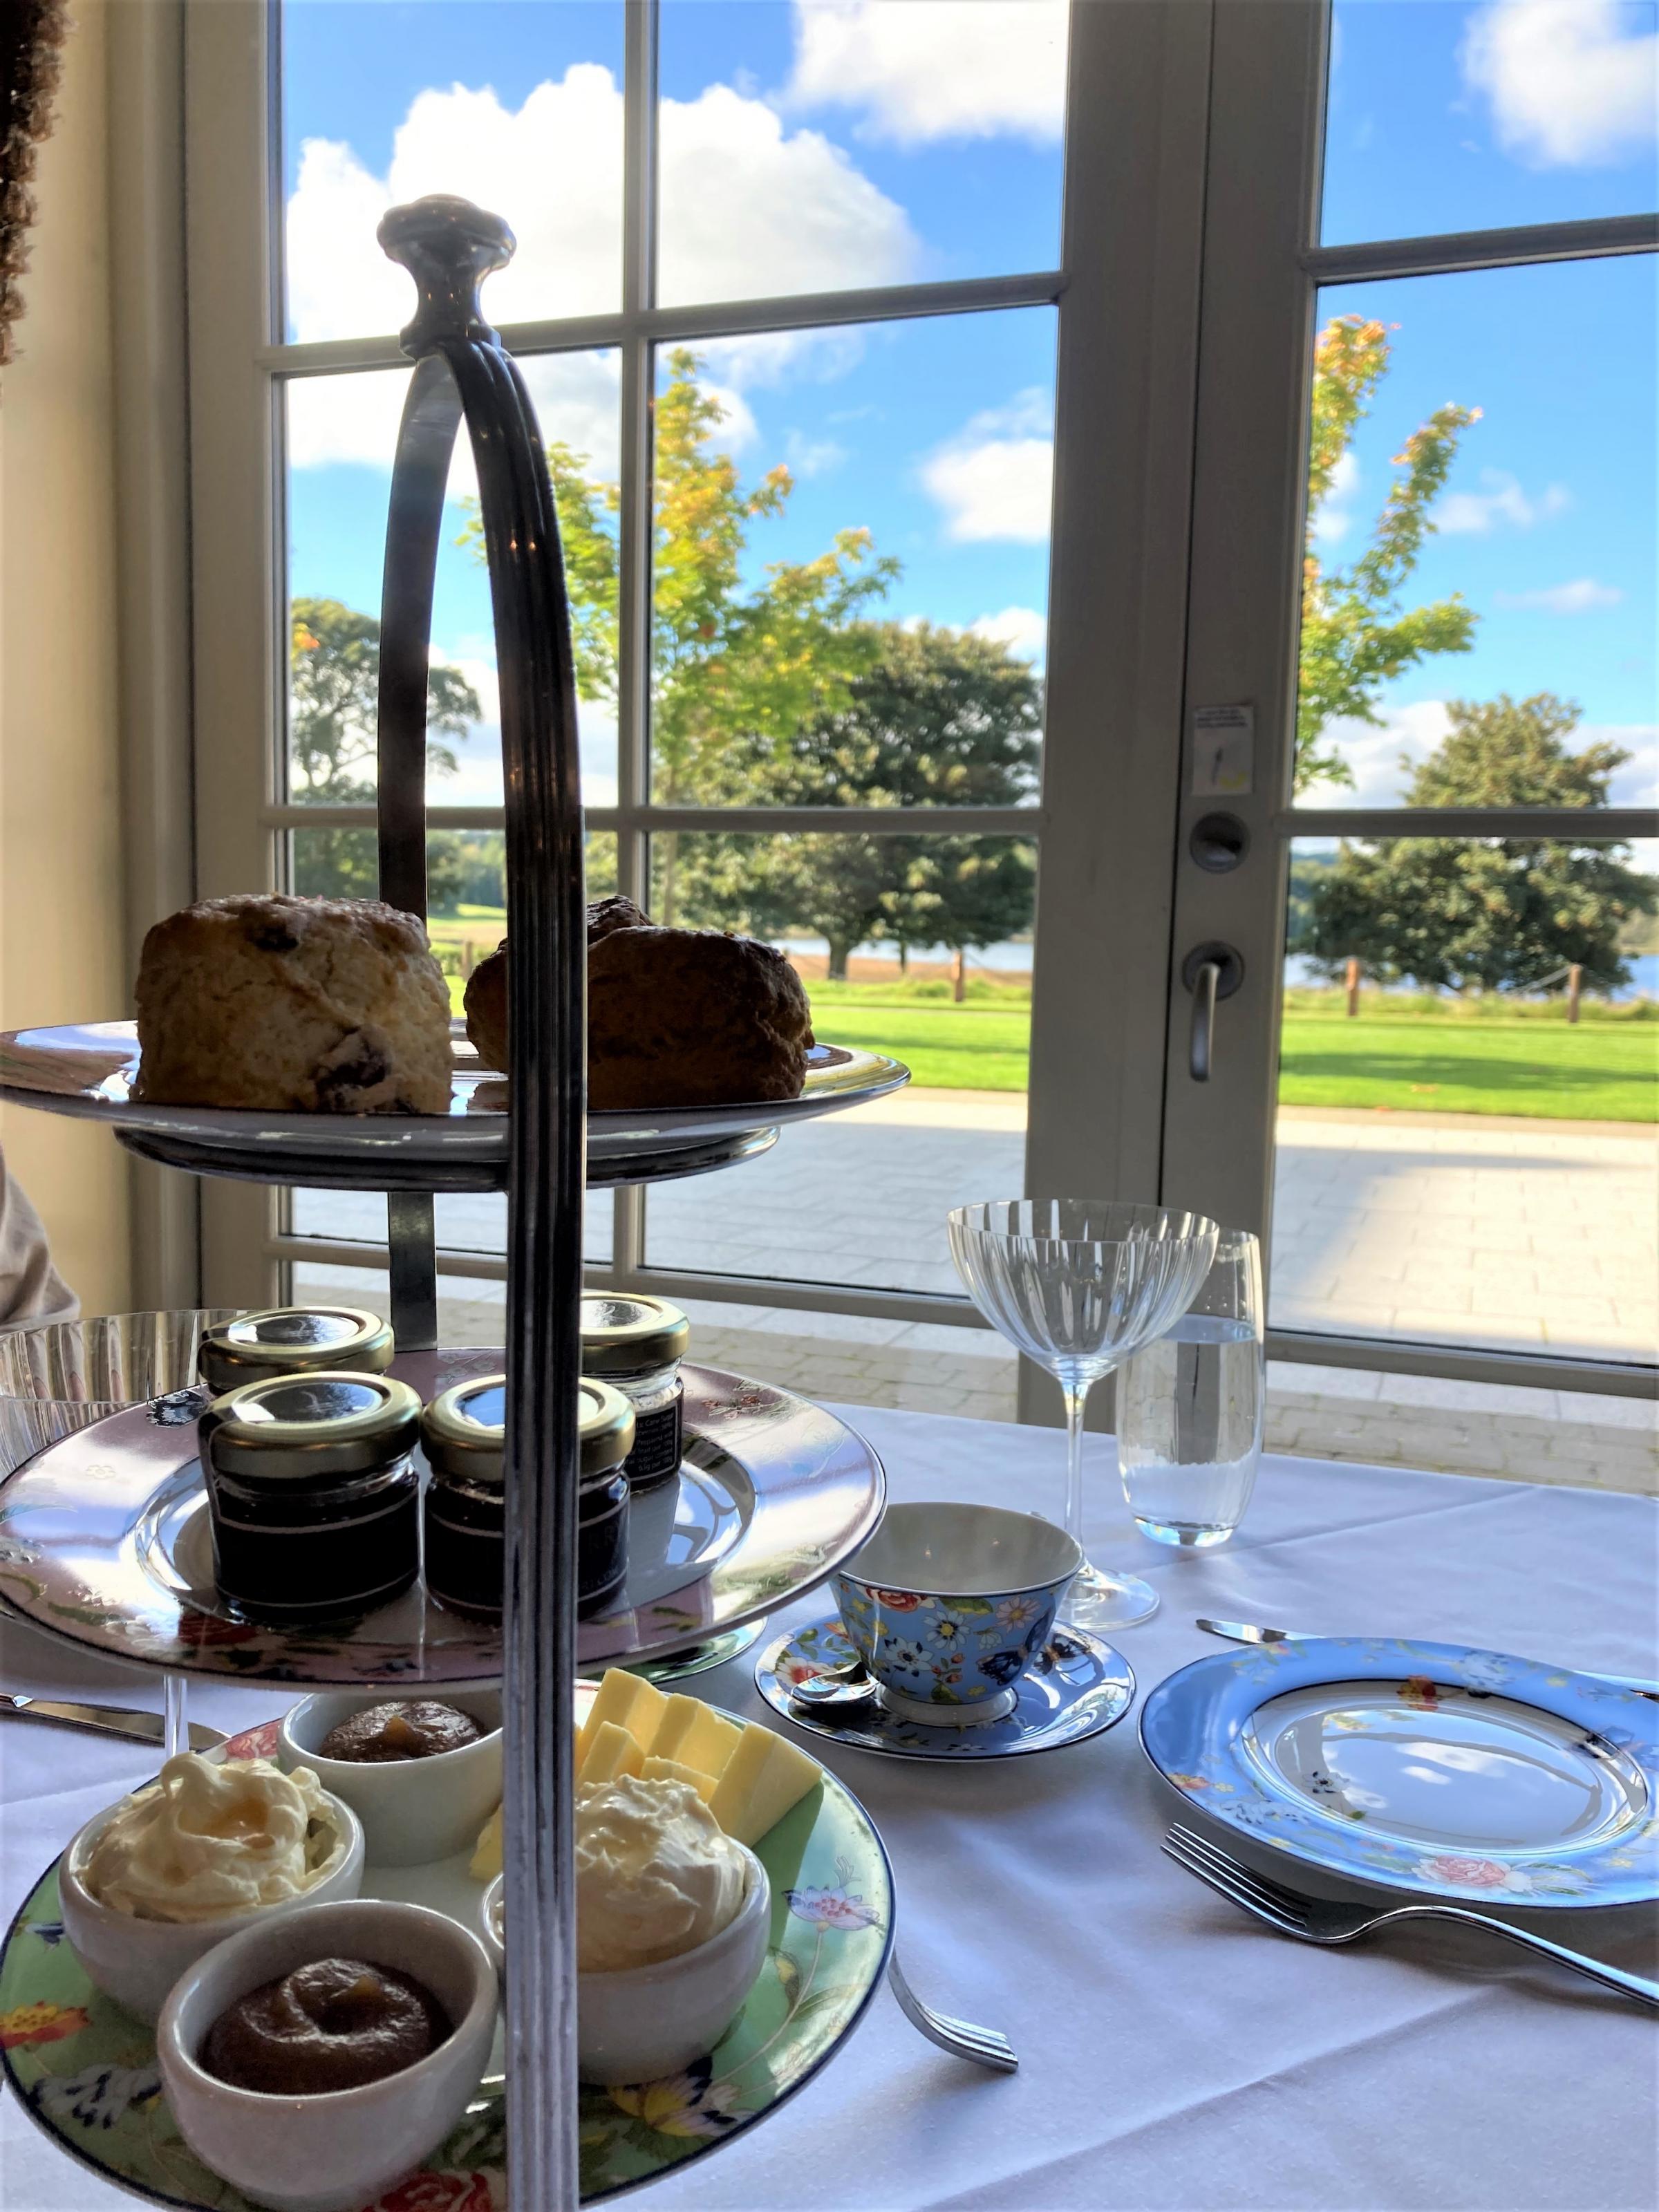 The Mind and Body Afternoon Tea served in the Lough Erne Resorts Catalina restaurant.